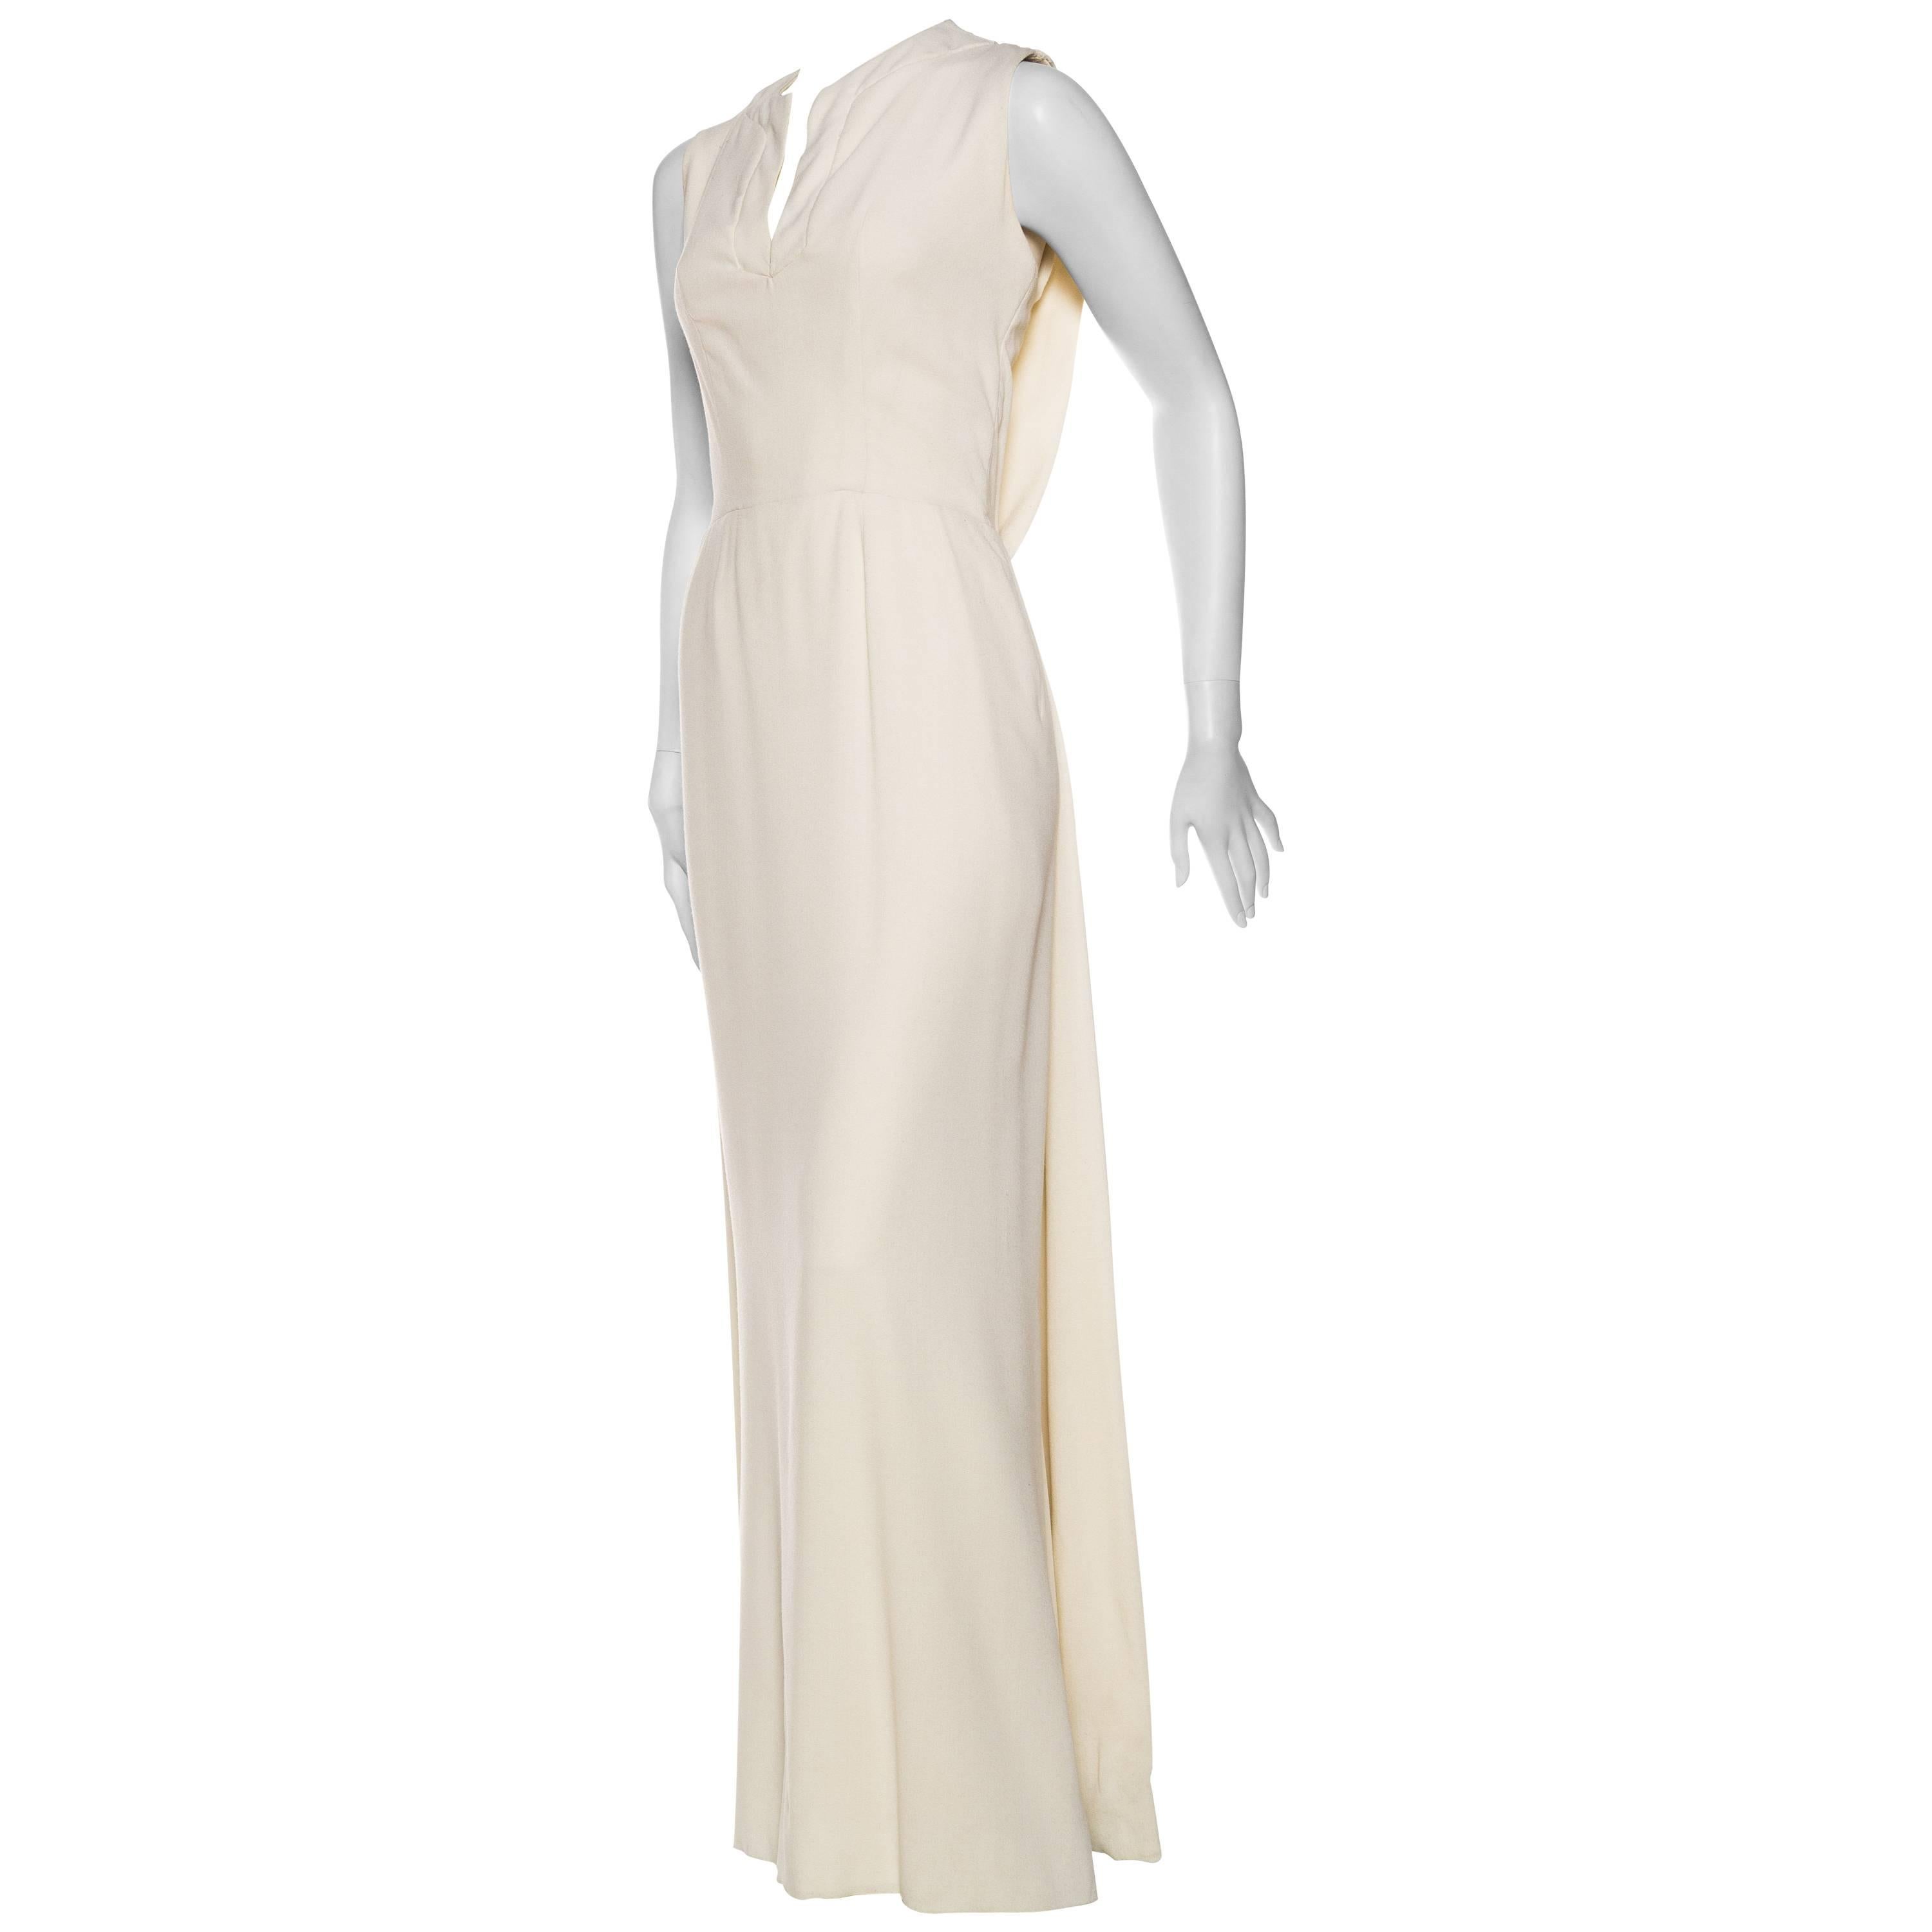 1960S PIERRE BALMAIN Off White Rayon & Silk Crepe Modernist Gown With Draped Ba